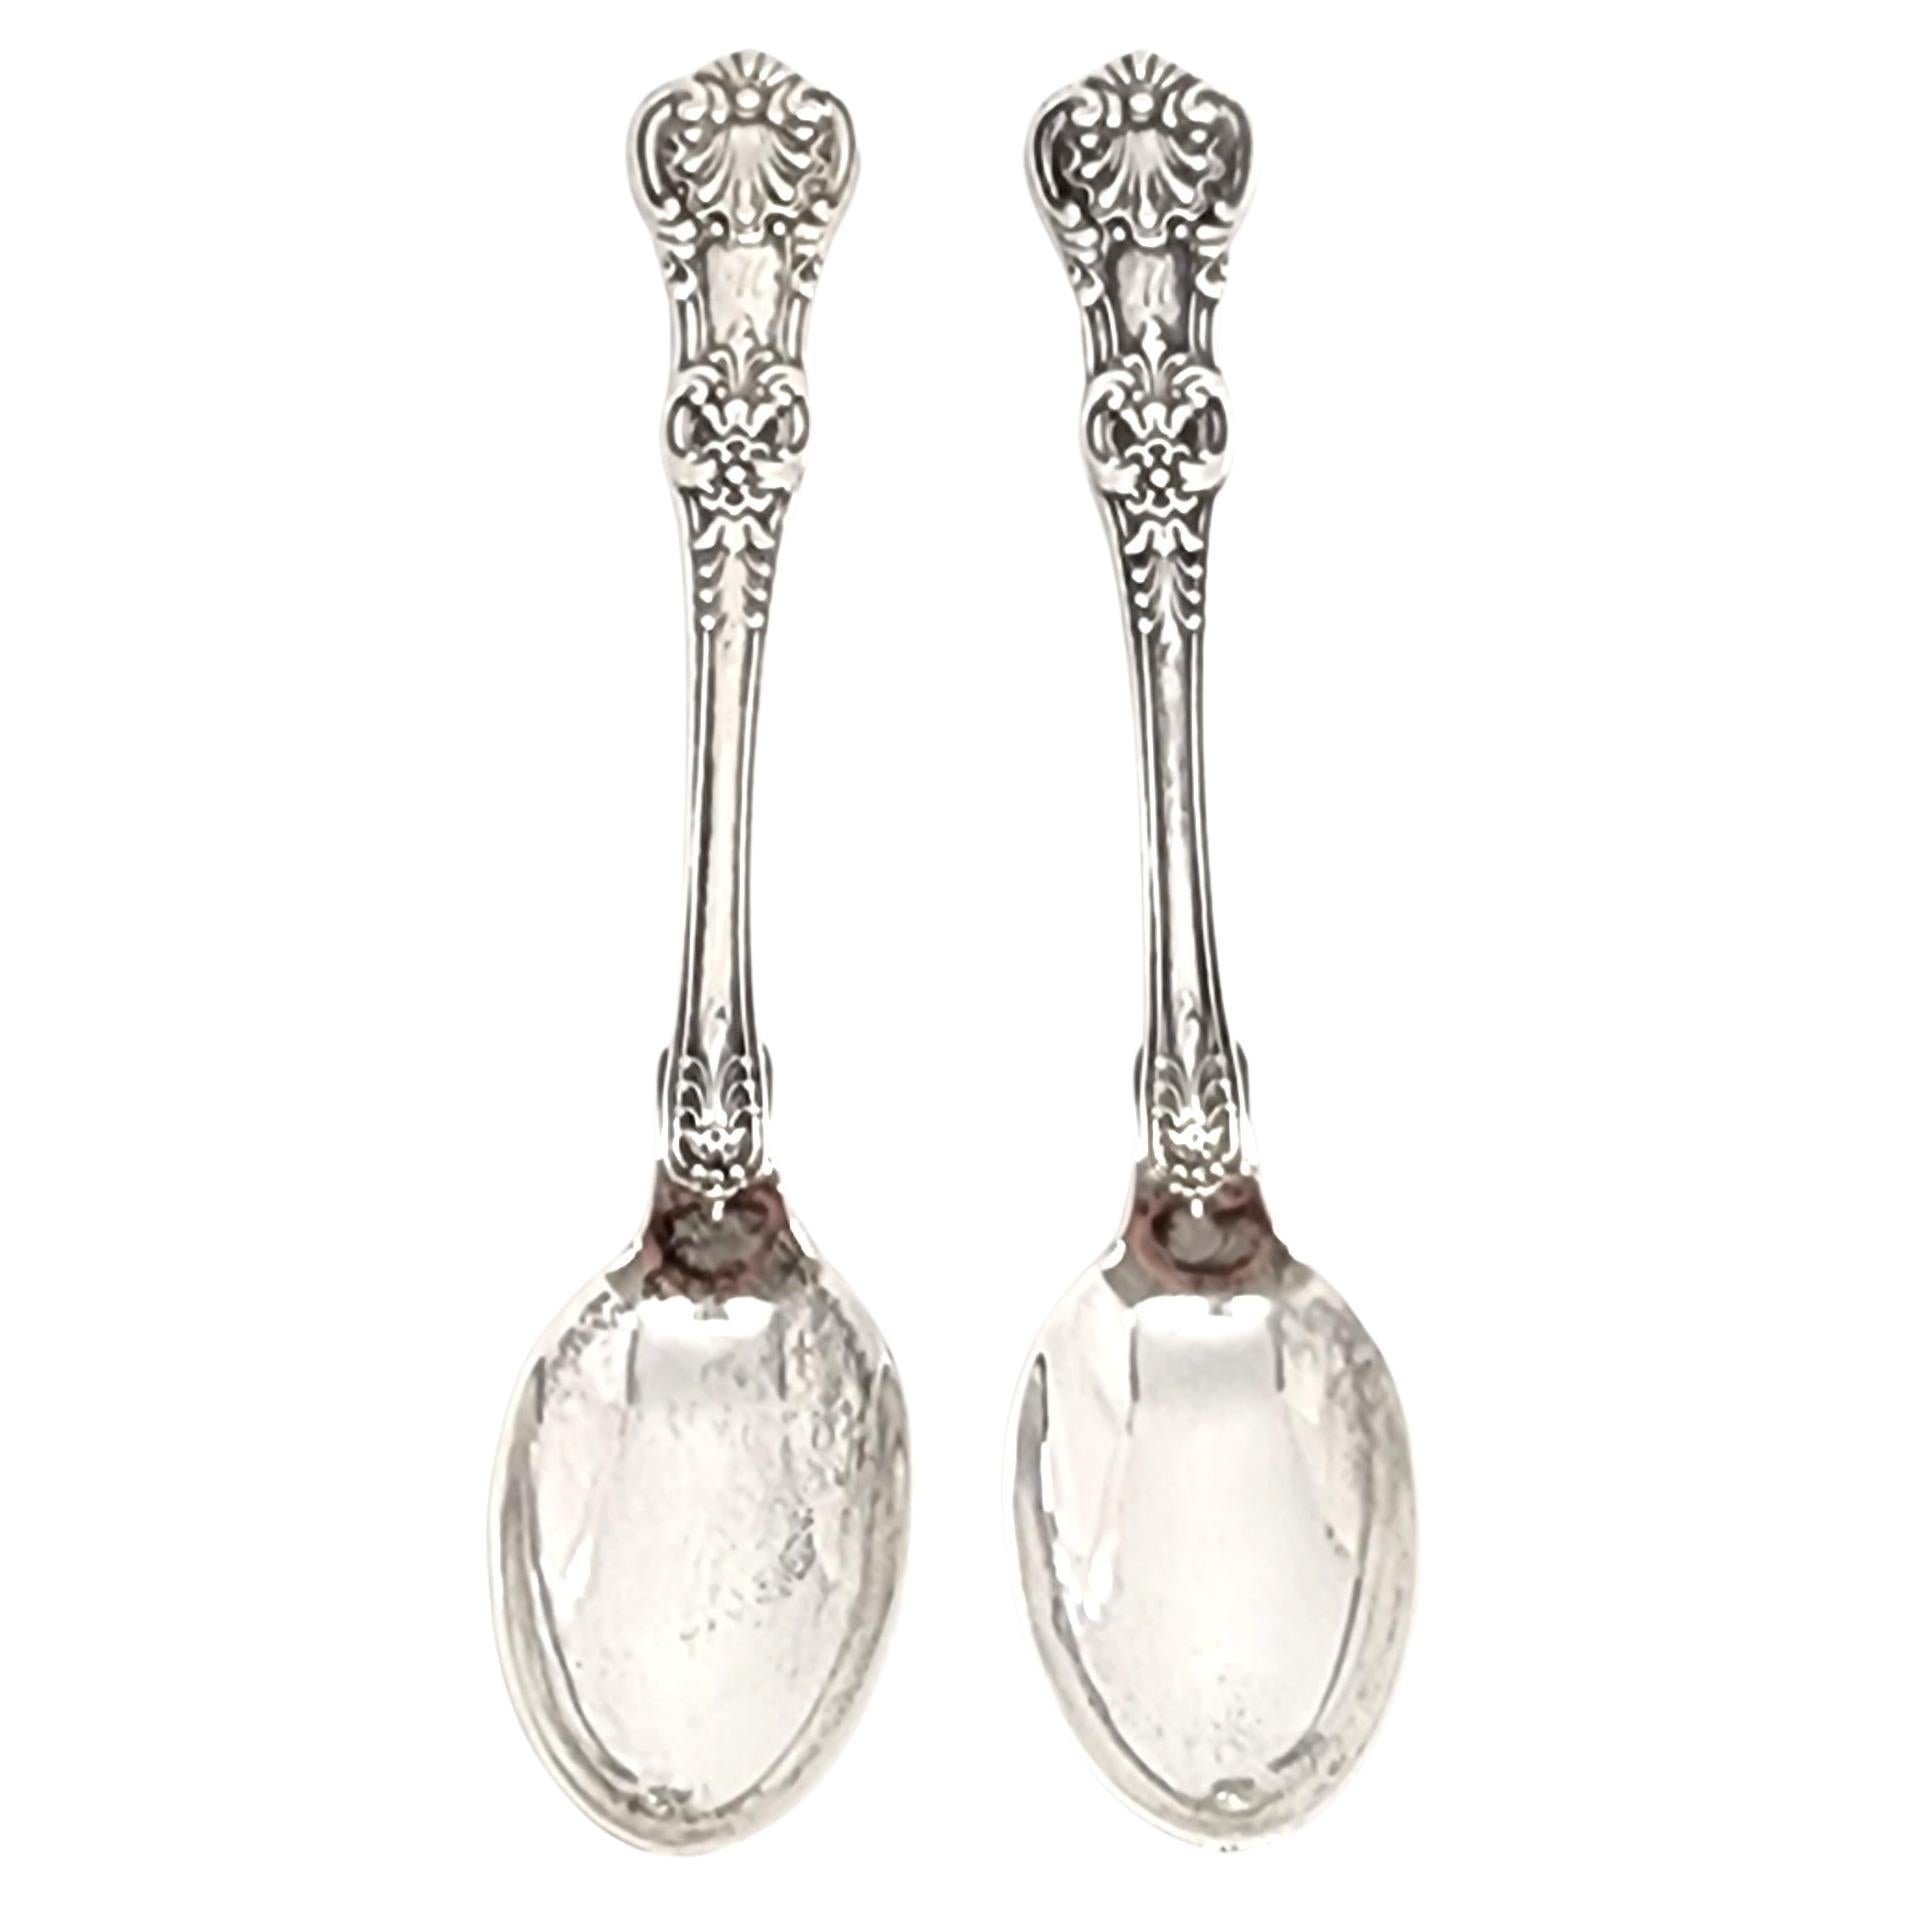 Set of 2 Tiffany & Co Sterling Silver English King Demitasse Spoons